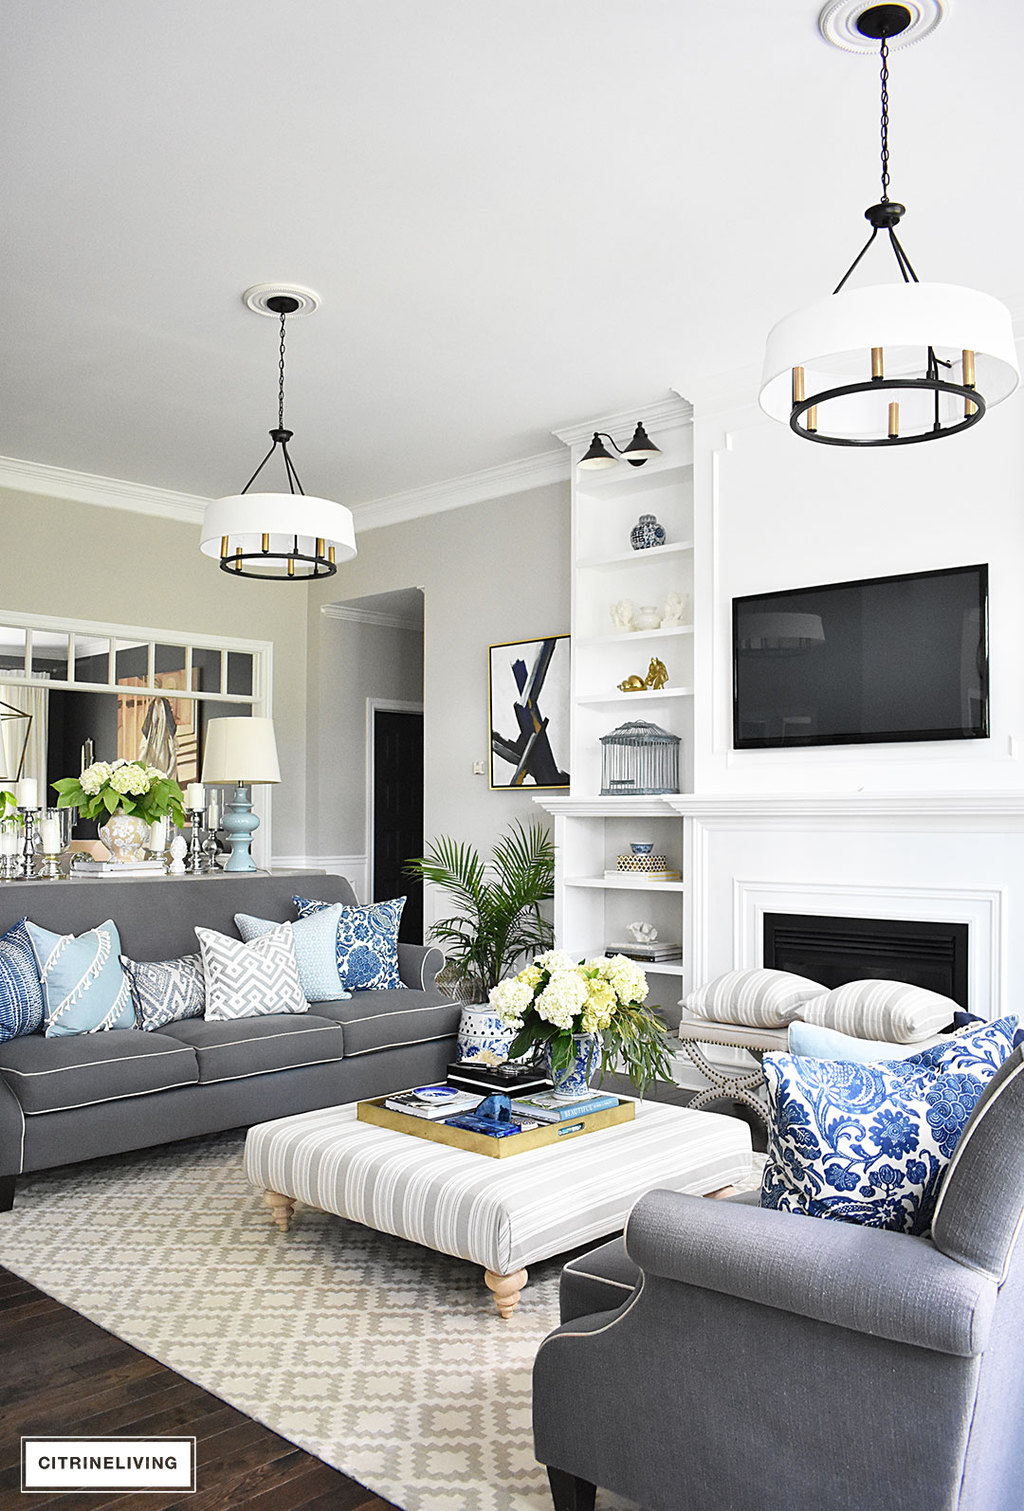 20+ Fresh Ideas for Decorating with Blue and White ...